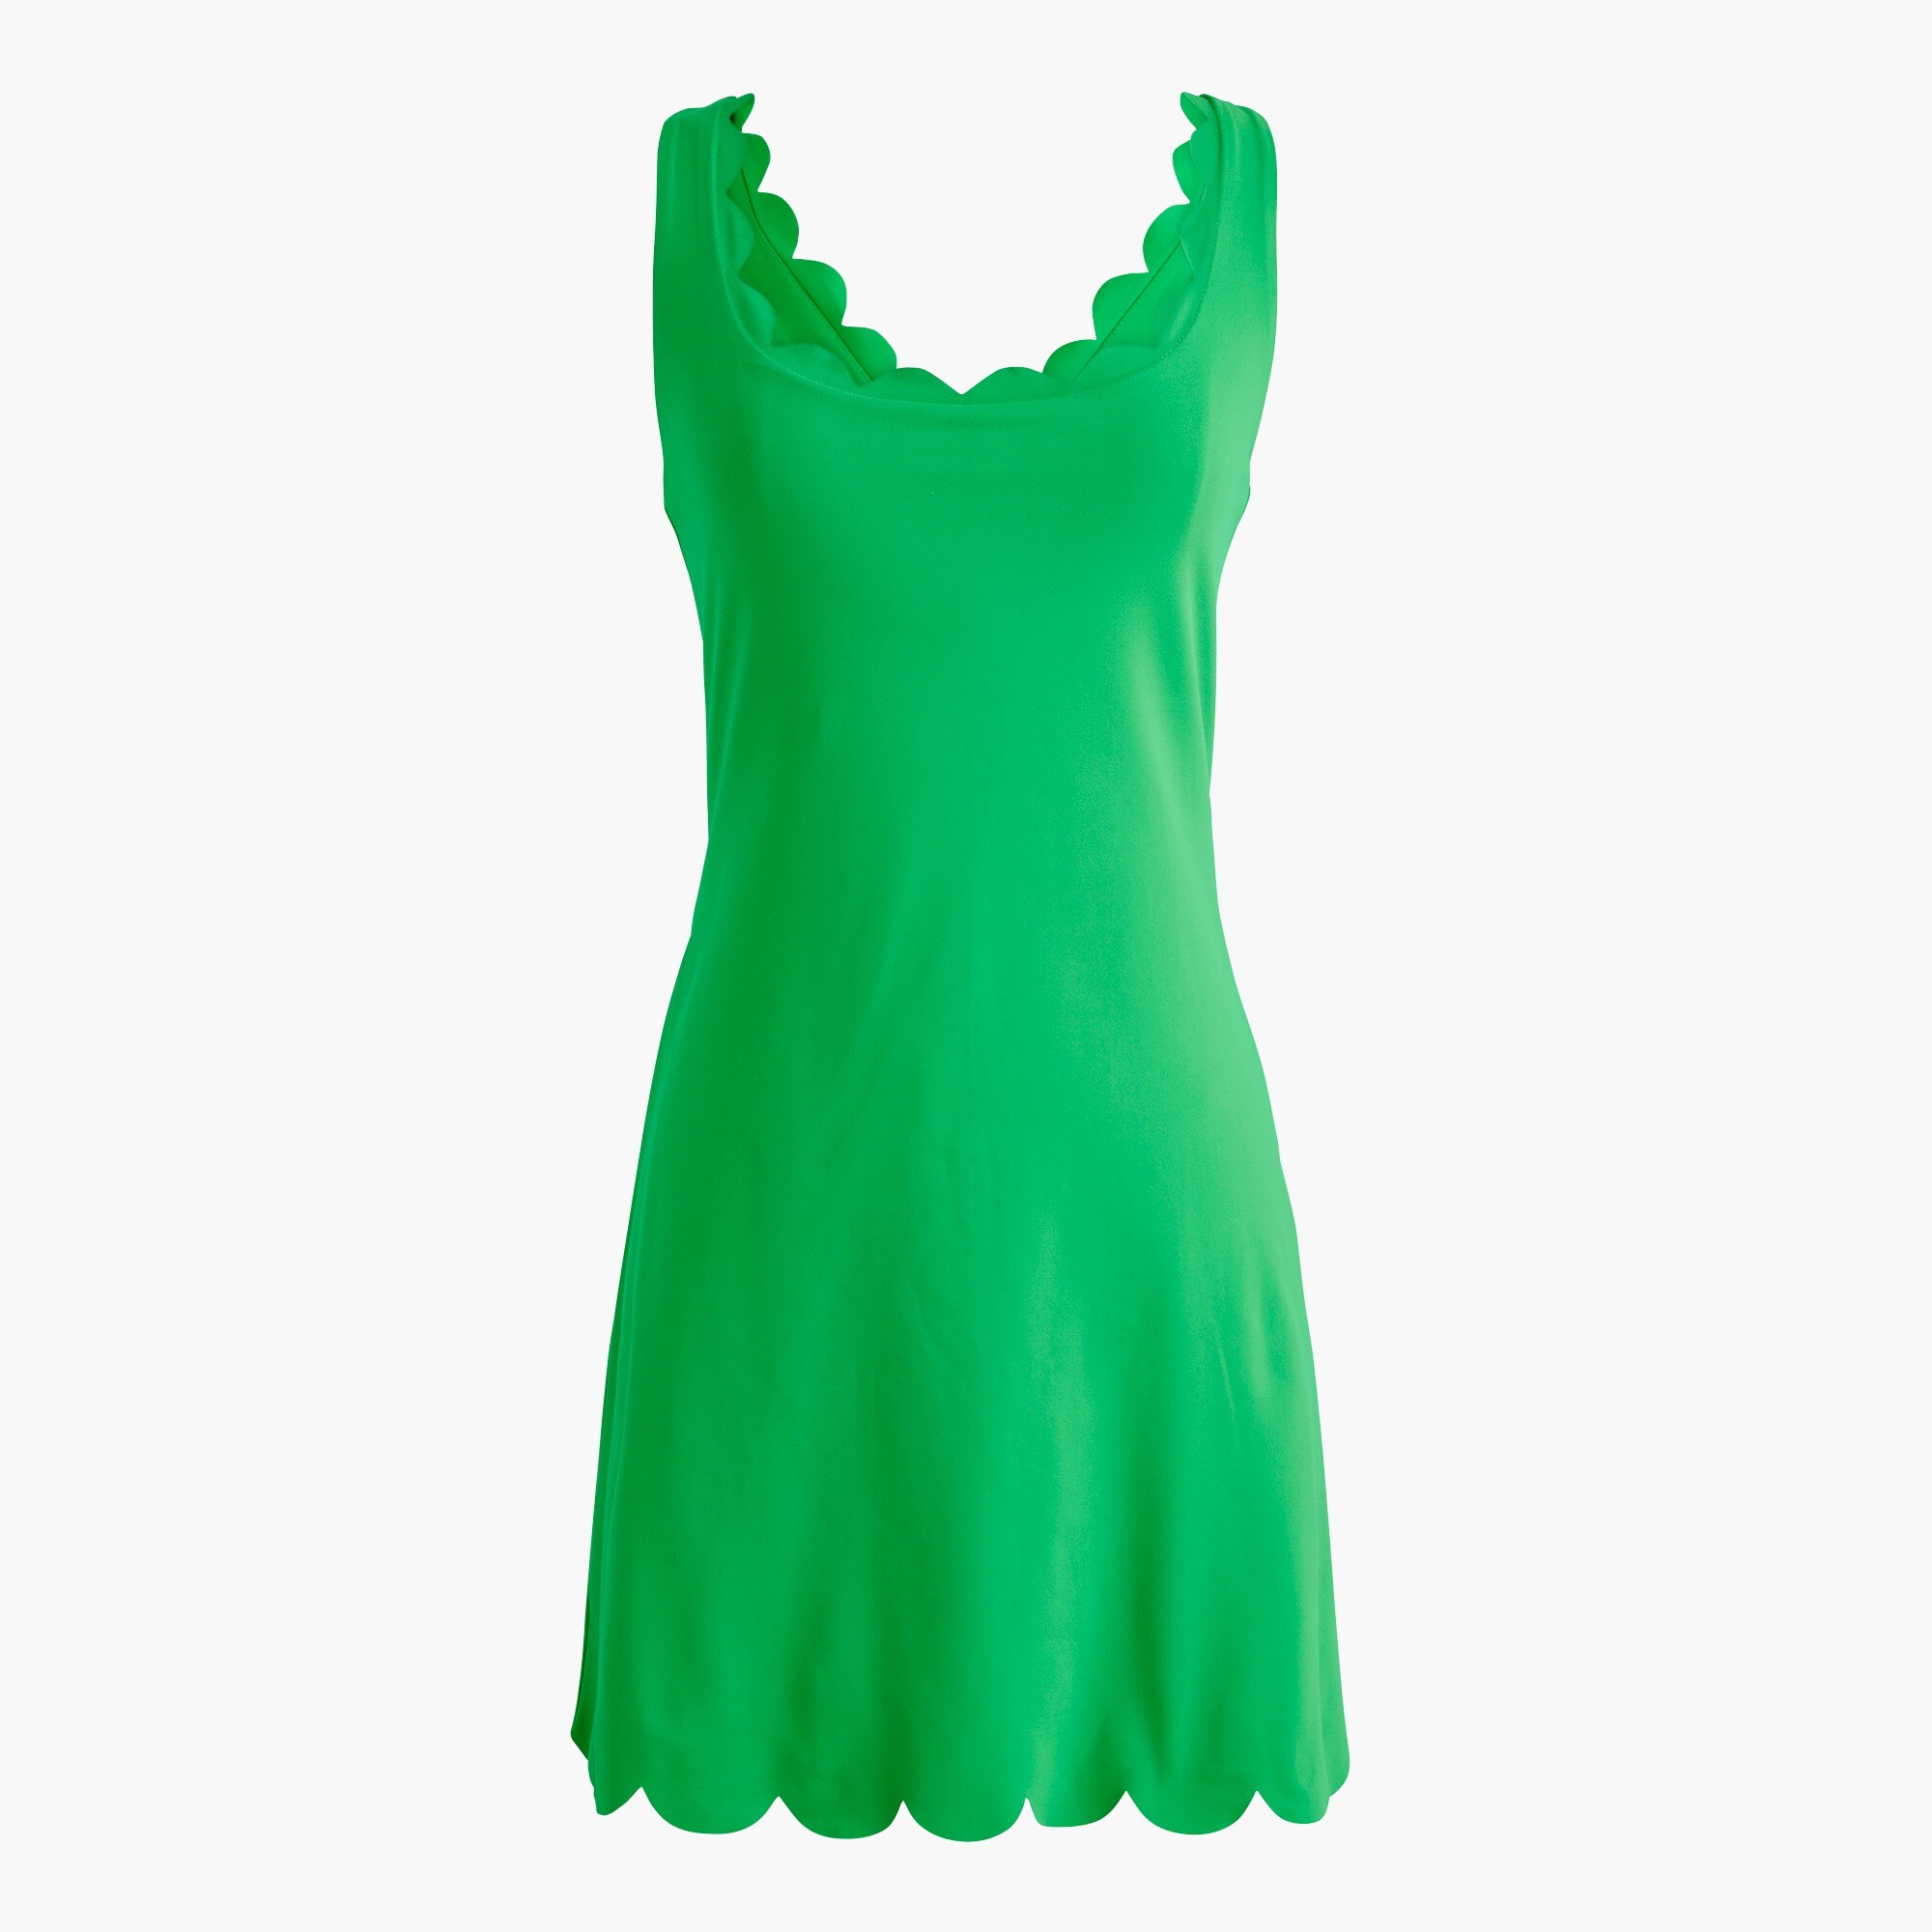  Scalloped active dress